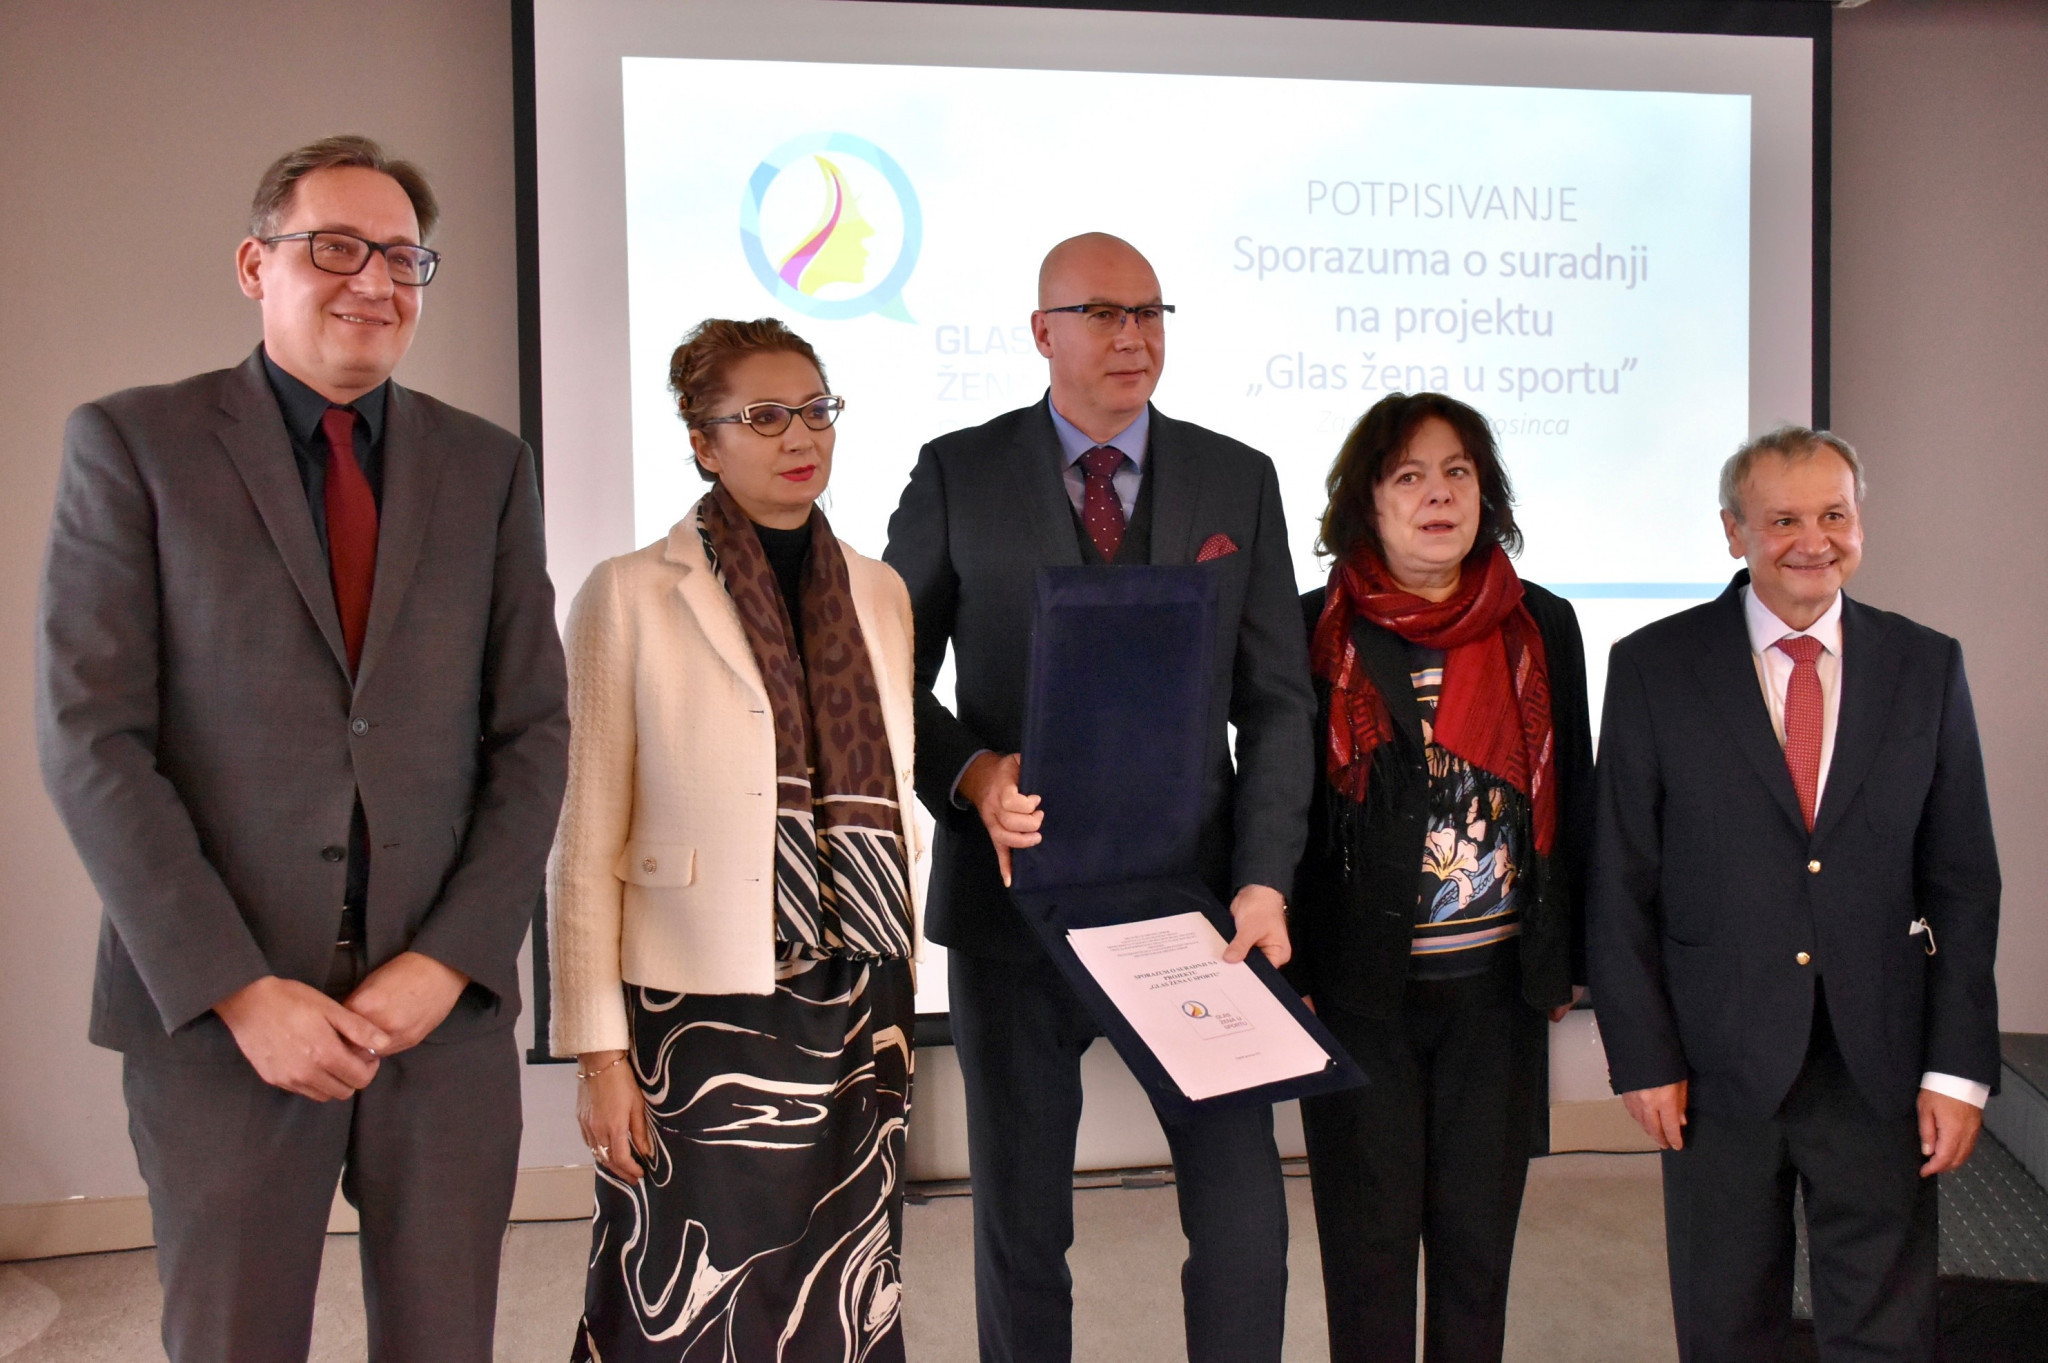 The Croatian Olympic Committee is supporting a project for better media coverage of women's sport ©COC